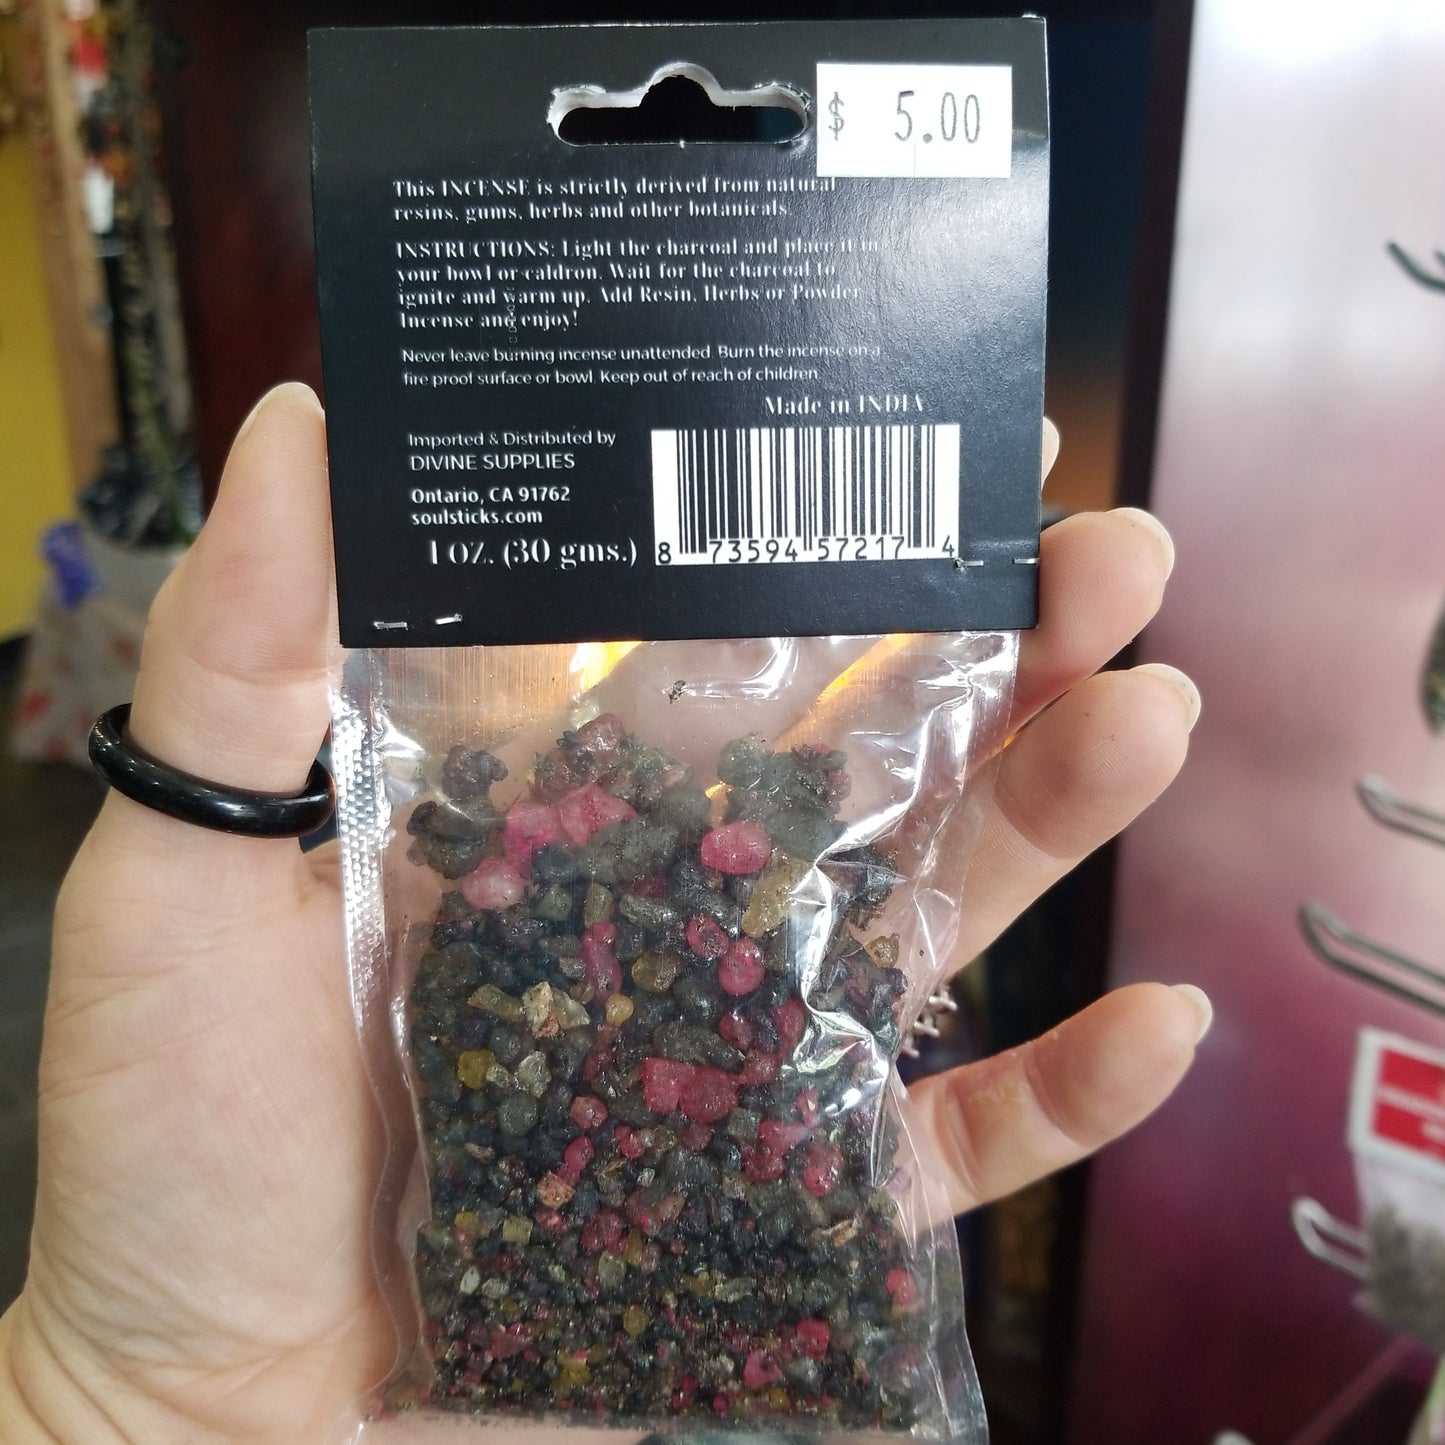 House Cleansing Resin Incense